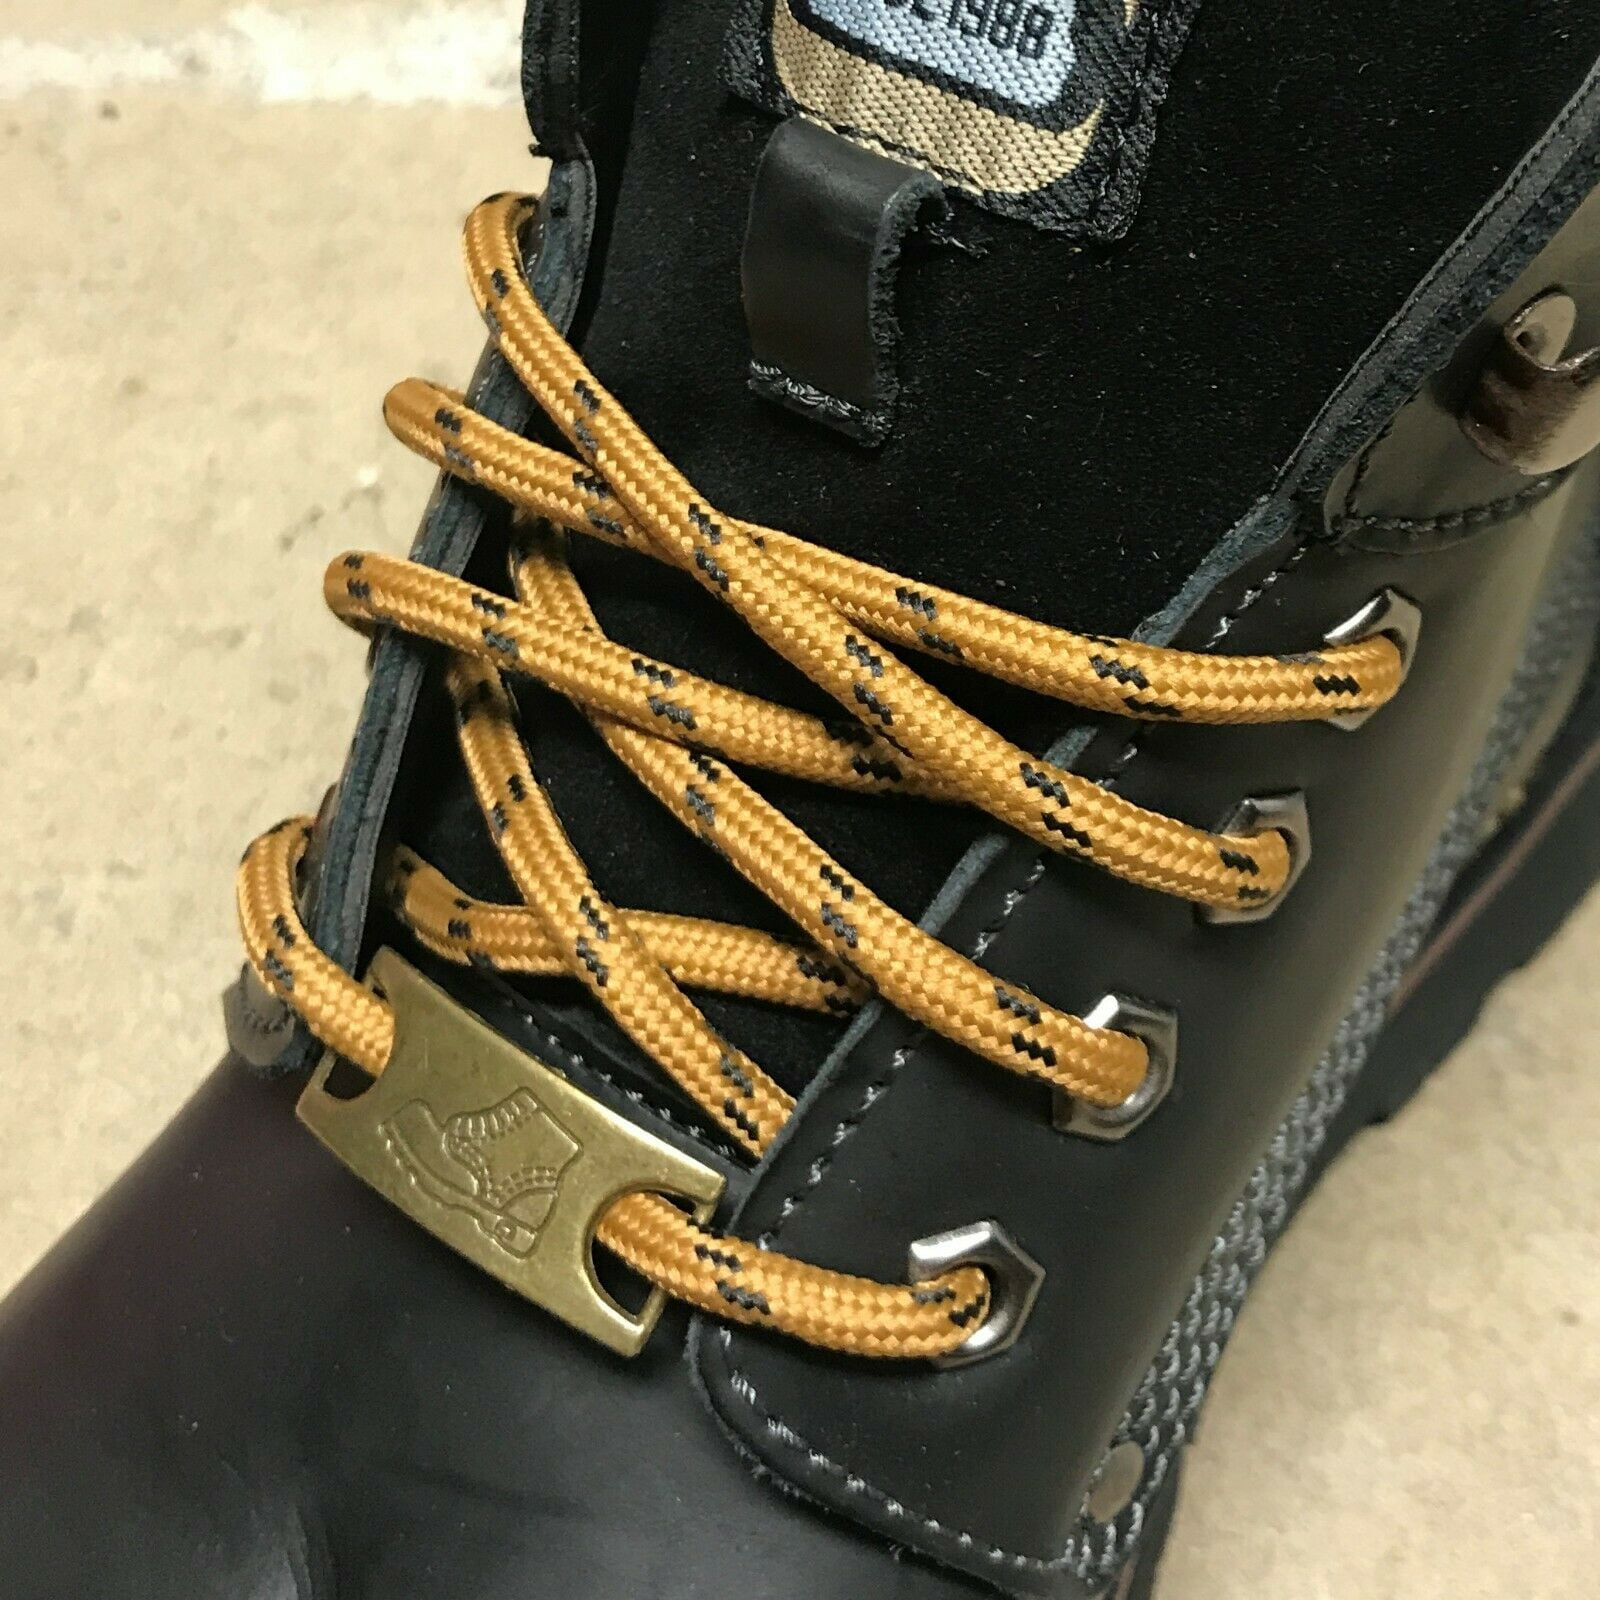 Boot Laces Hiking Walking Safety Round laces  1 PAIR FREE TO YOUR ORDER ! 